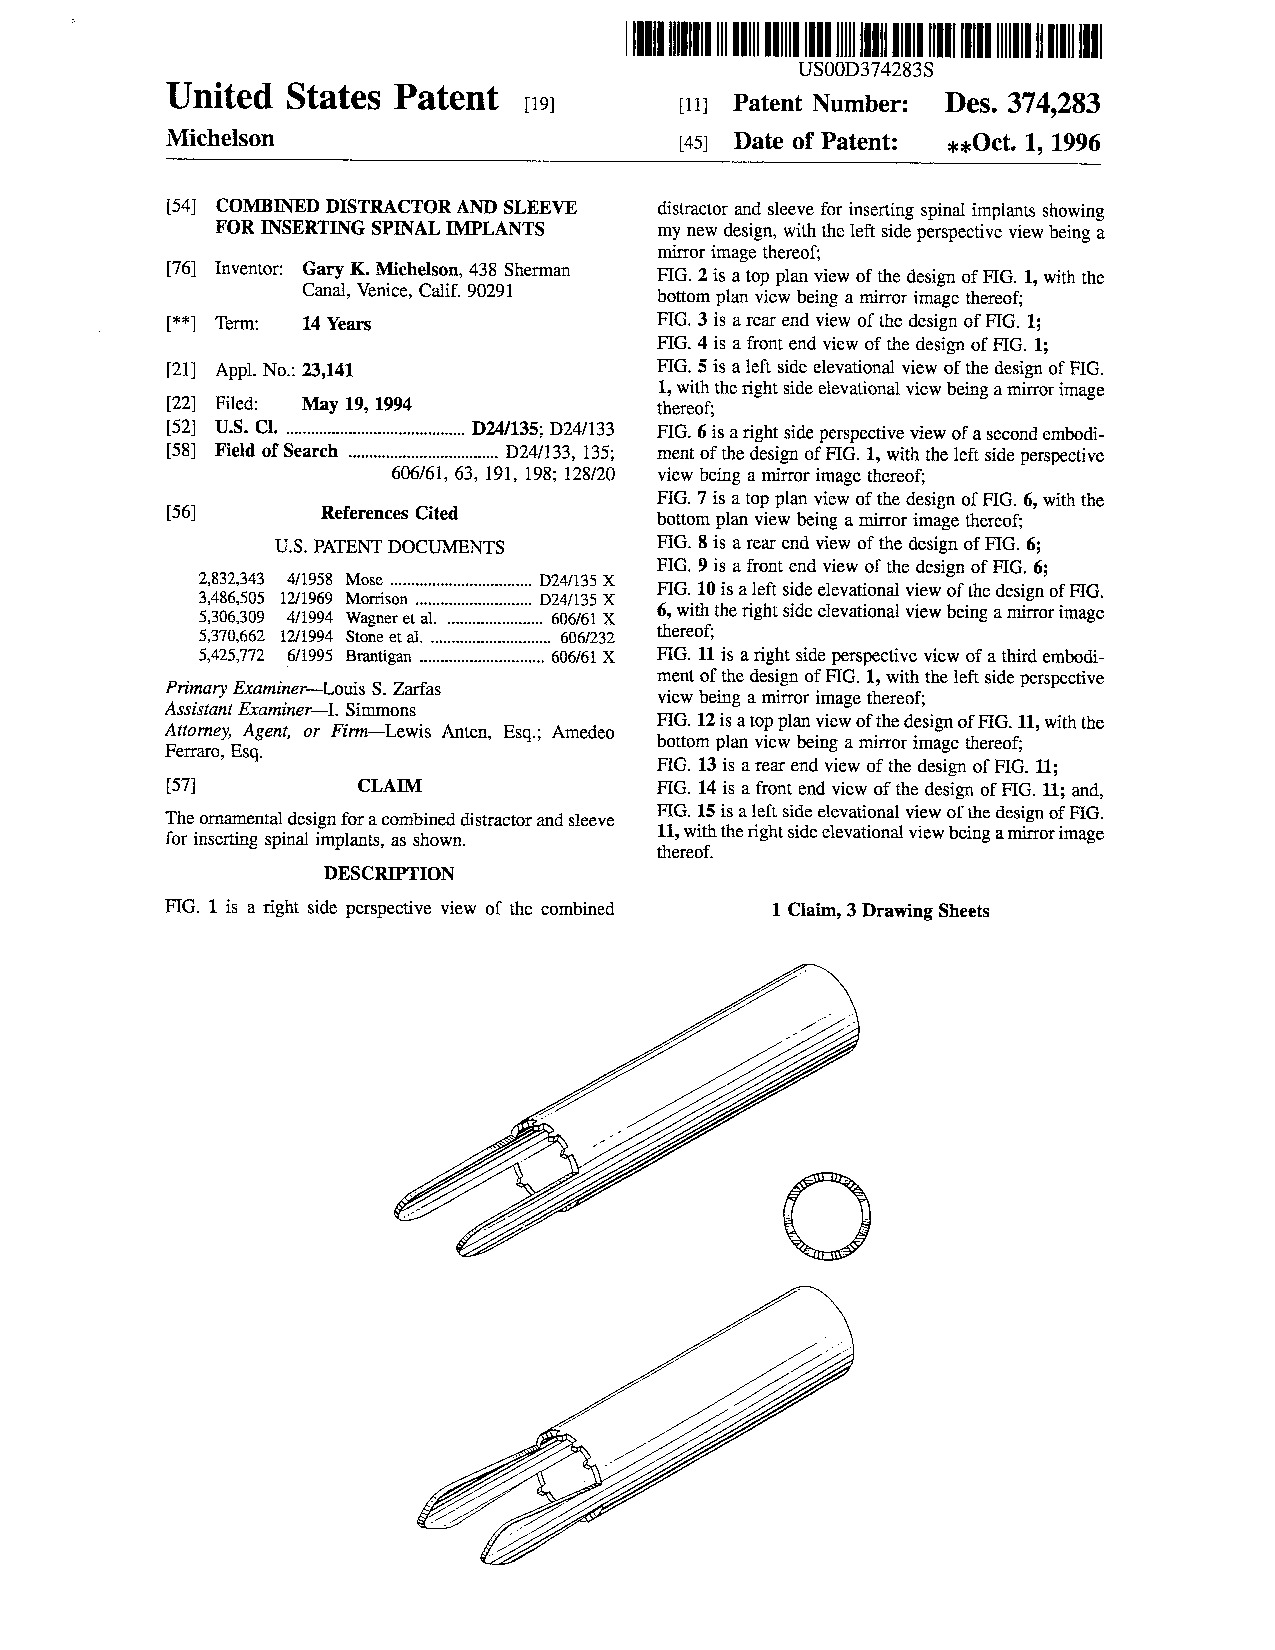 Combined distractor and sleeve for inserting spinal implants - Patent D374,283